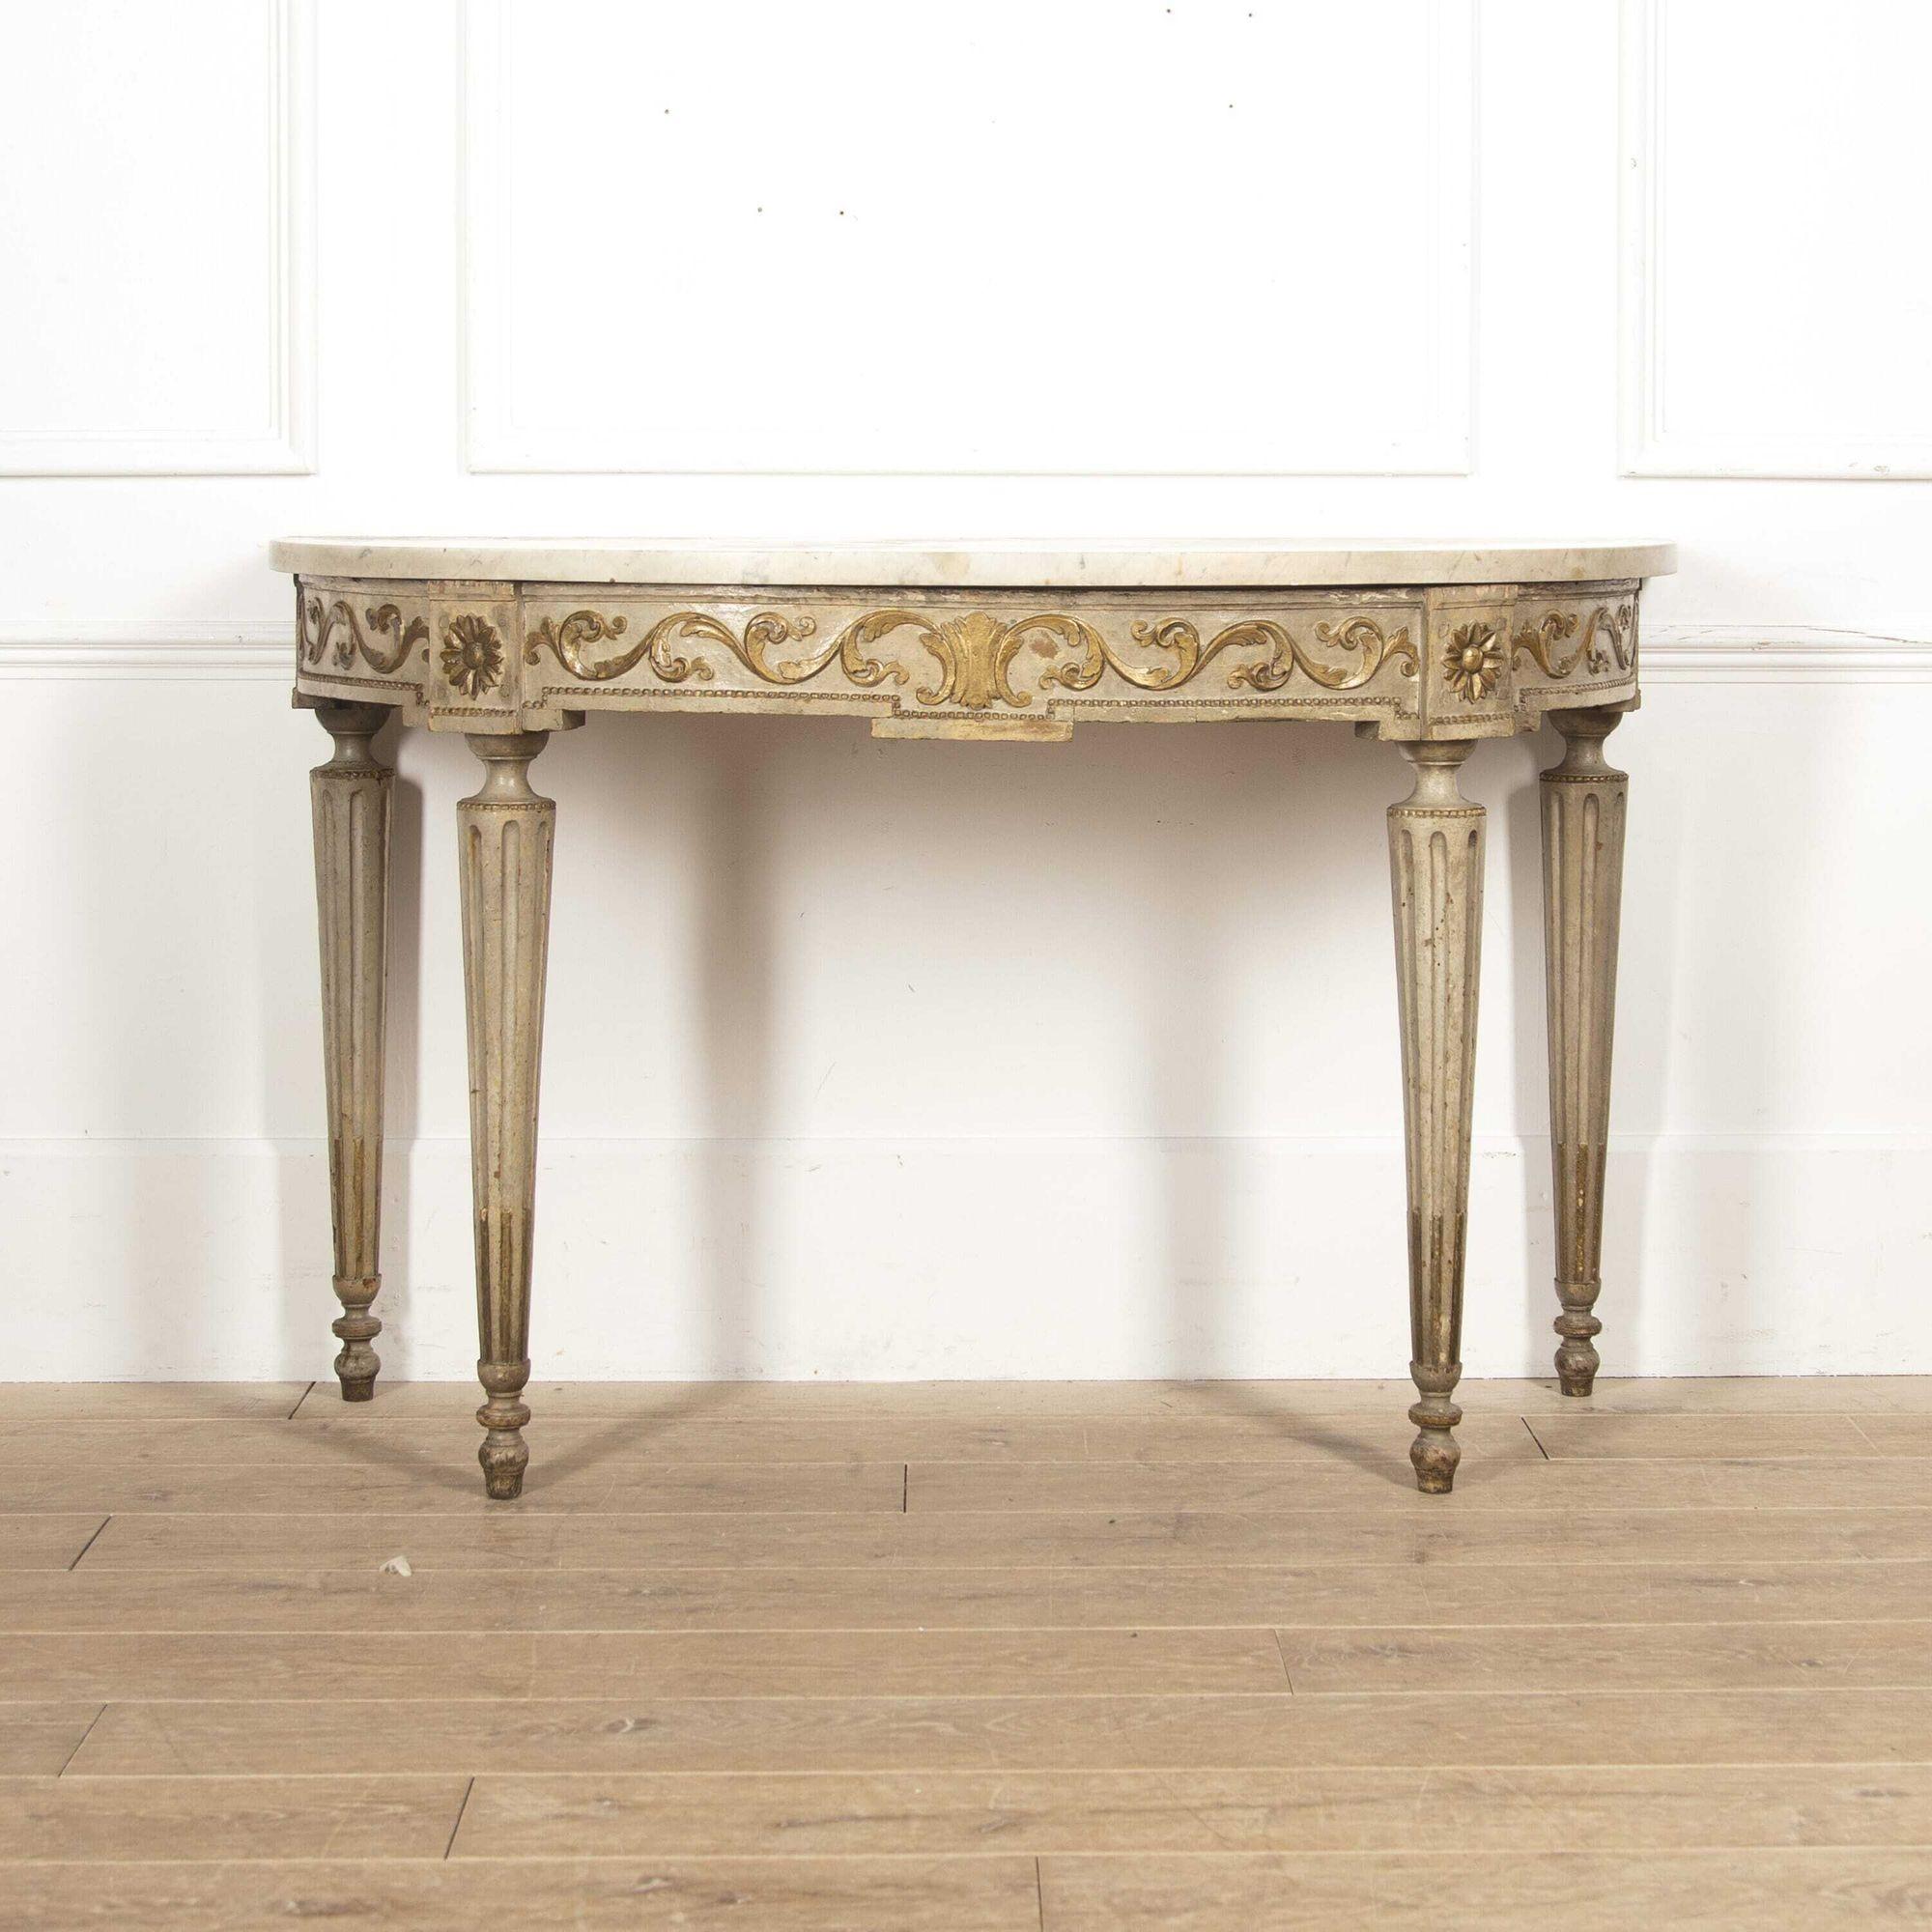 French 18th century Demi-lune console table. 
This console table offers a simplistic turn throughout the frame which is supported on beautifully tapered legs with a thick marble top. 
This piece could happily free-stand or rest against the wall as